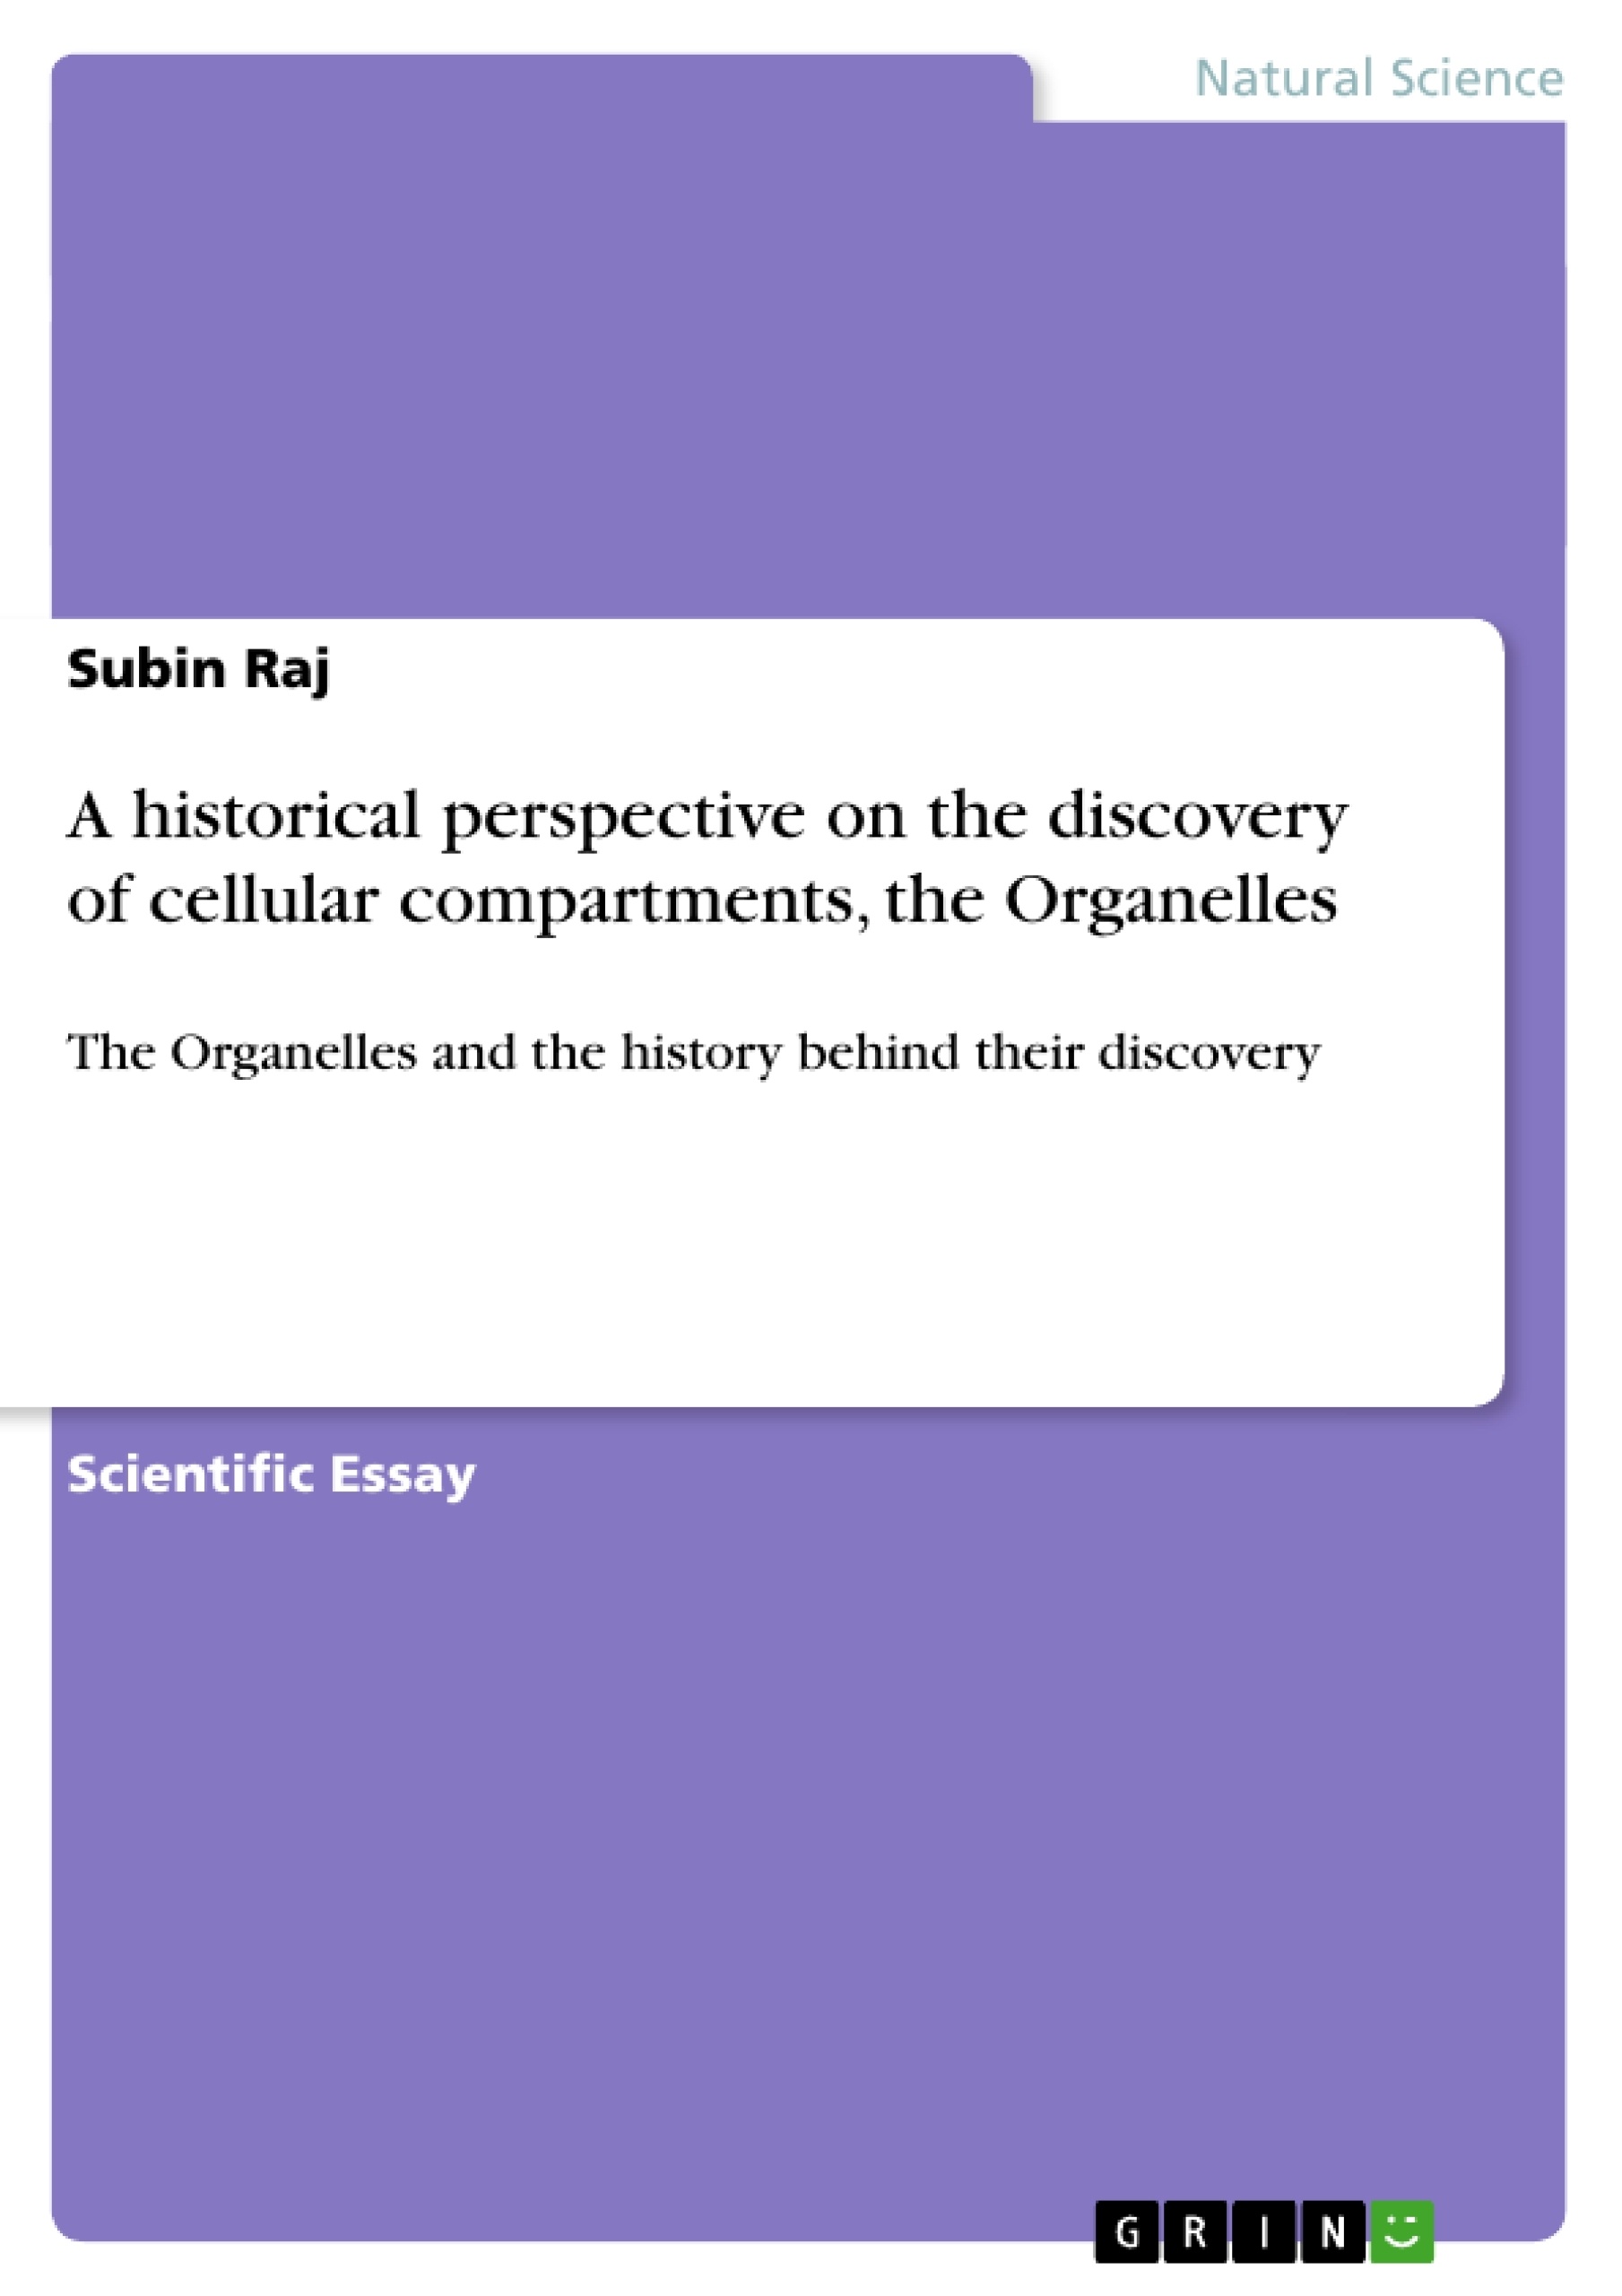 Título: A historical perspective on the discovery of cellular compartments, the Organelles